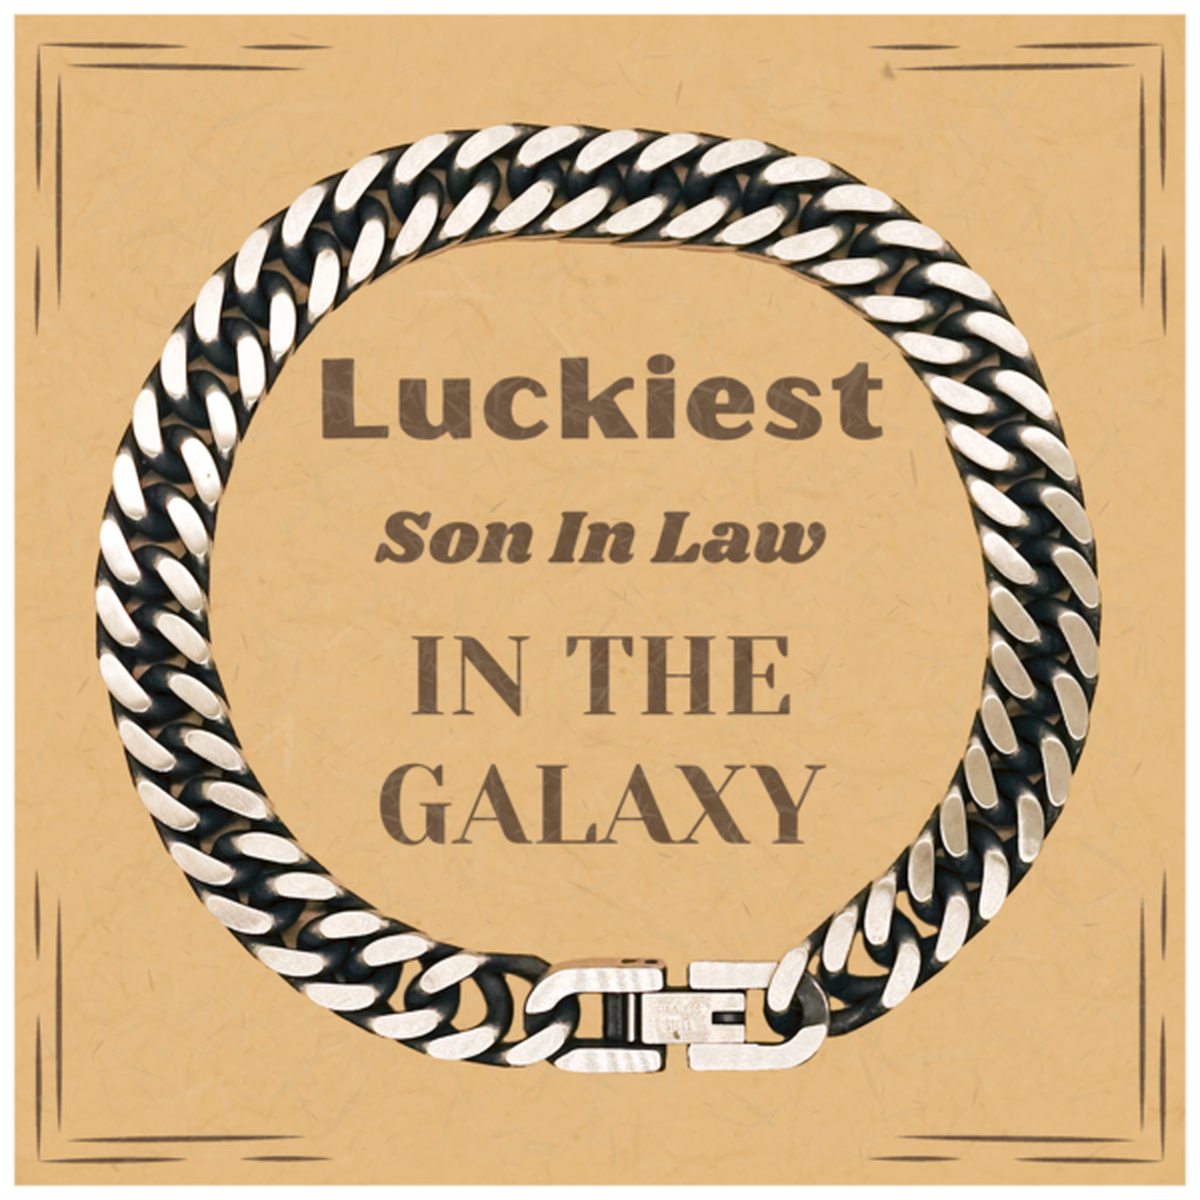 Luckiest Son In Law in the Galaxy, To My Son In Law Message Card Gifts, Christmas Son In Law Cuban Link Chain Bracelet Gifts, X-mas Birthday Unique Gifts For Son In Law Men Women